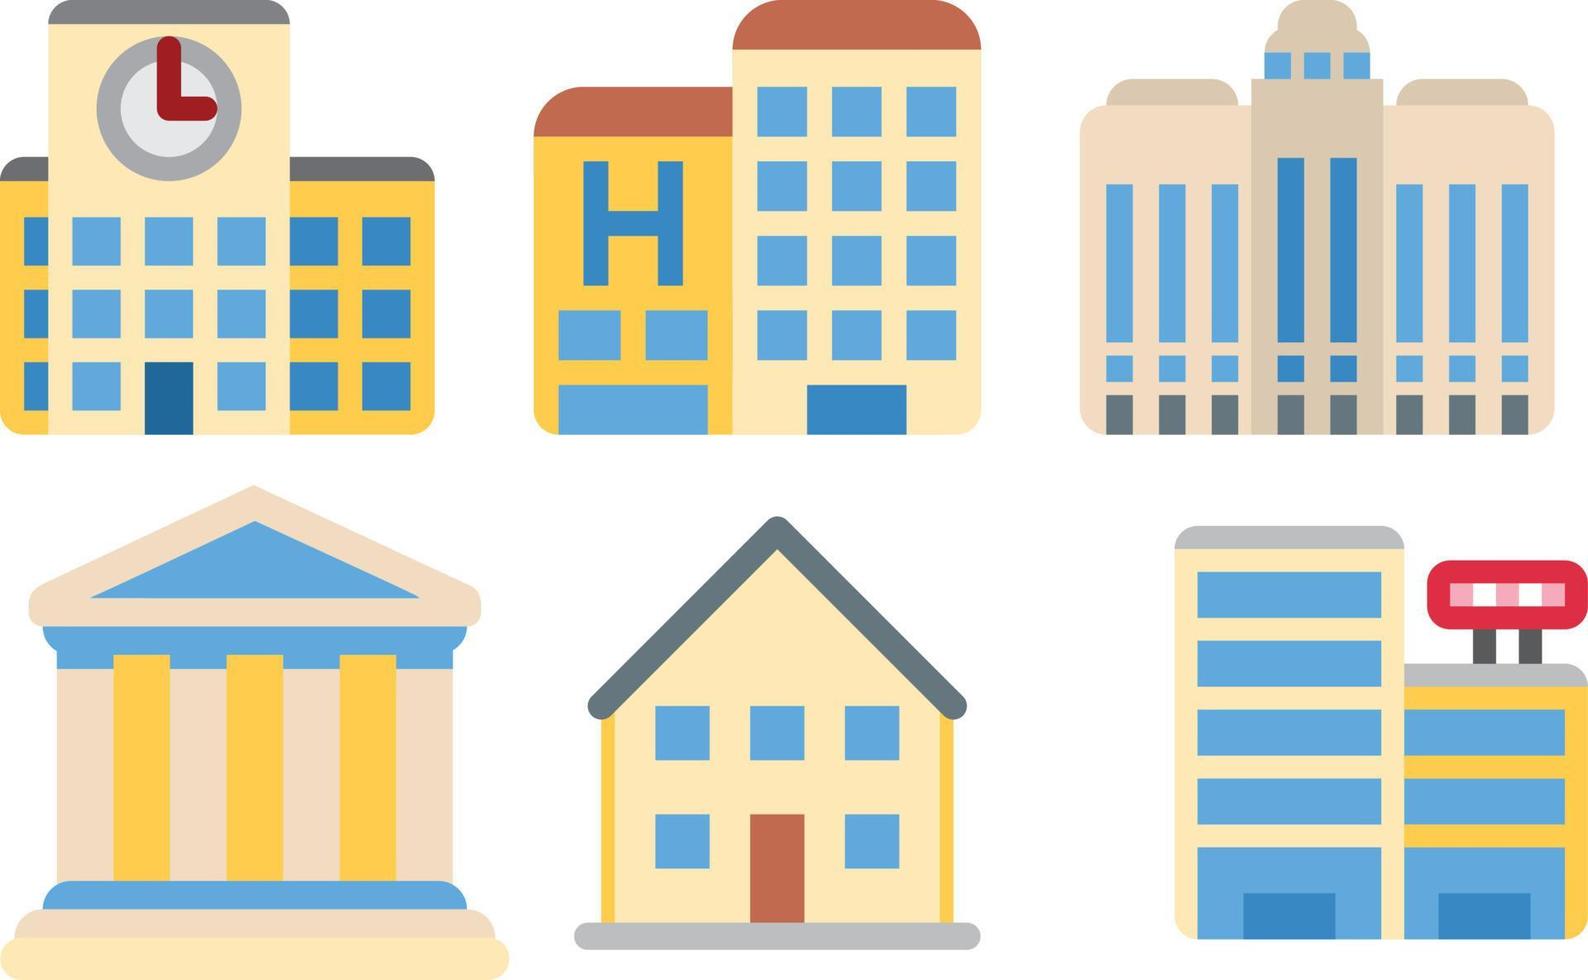 Set of icons of buildings. Vector illustration in flat design style.